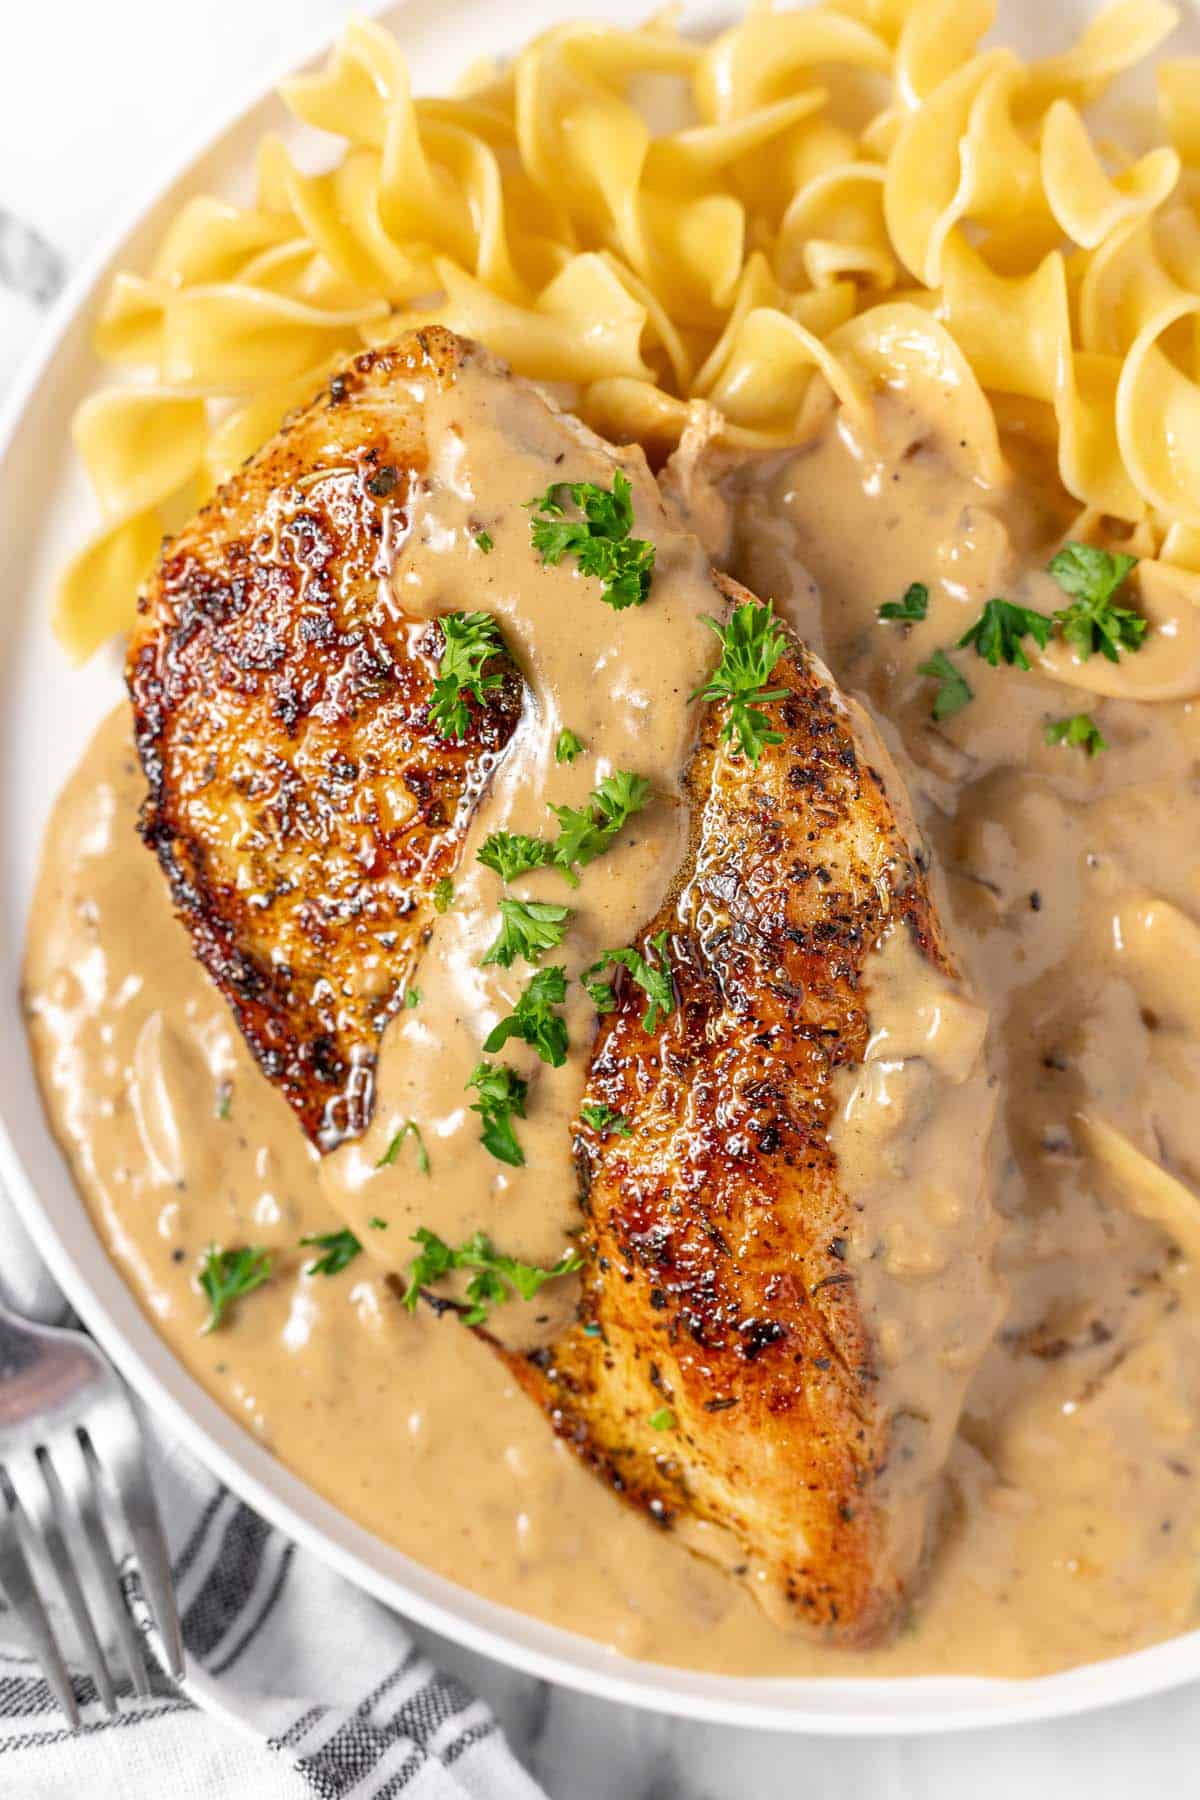 Sauteed chicken breast with creamy mushroom sauce and egg noodles. 